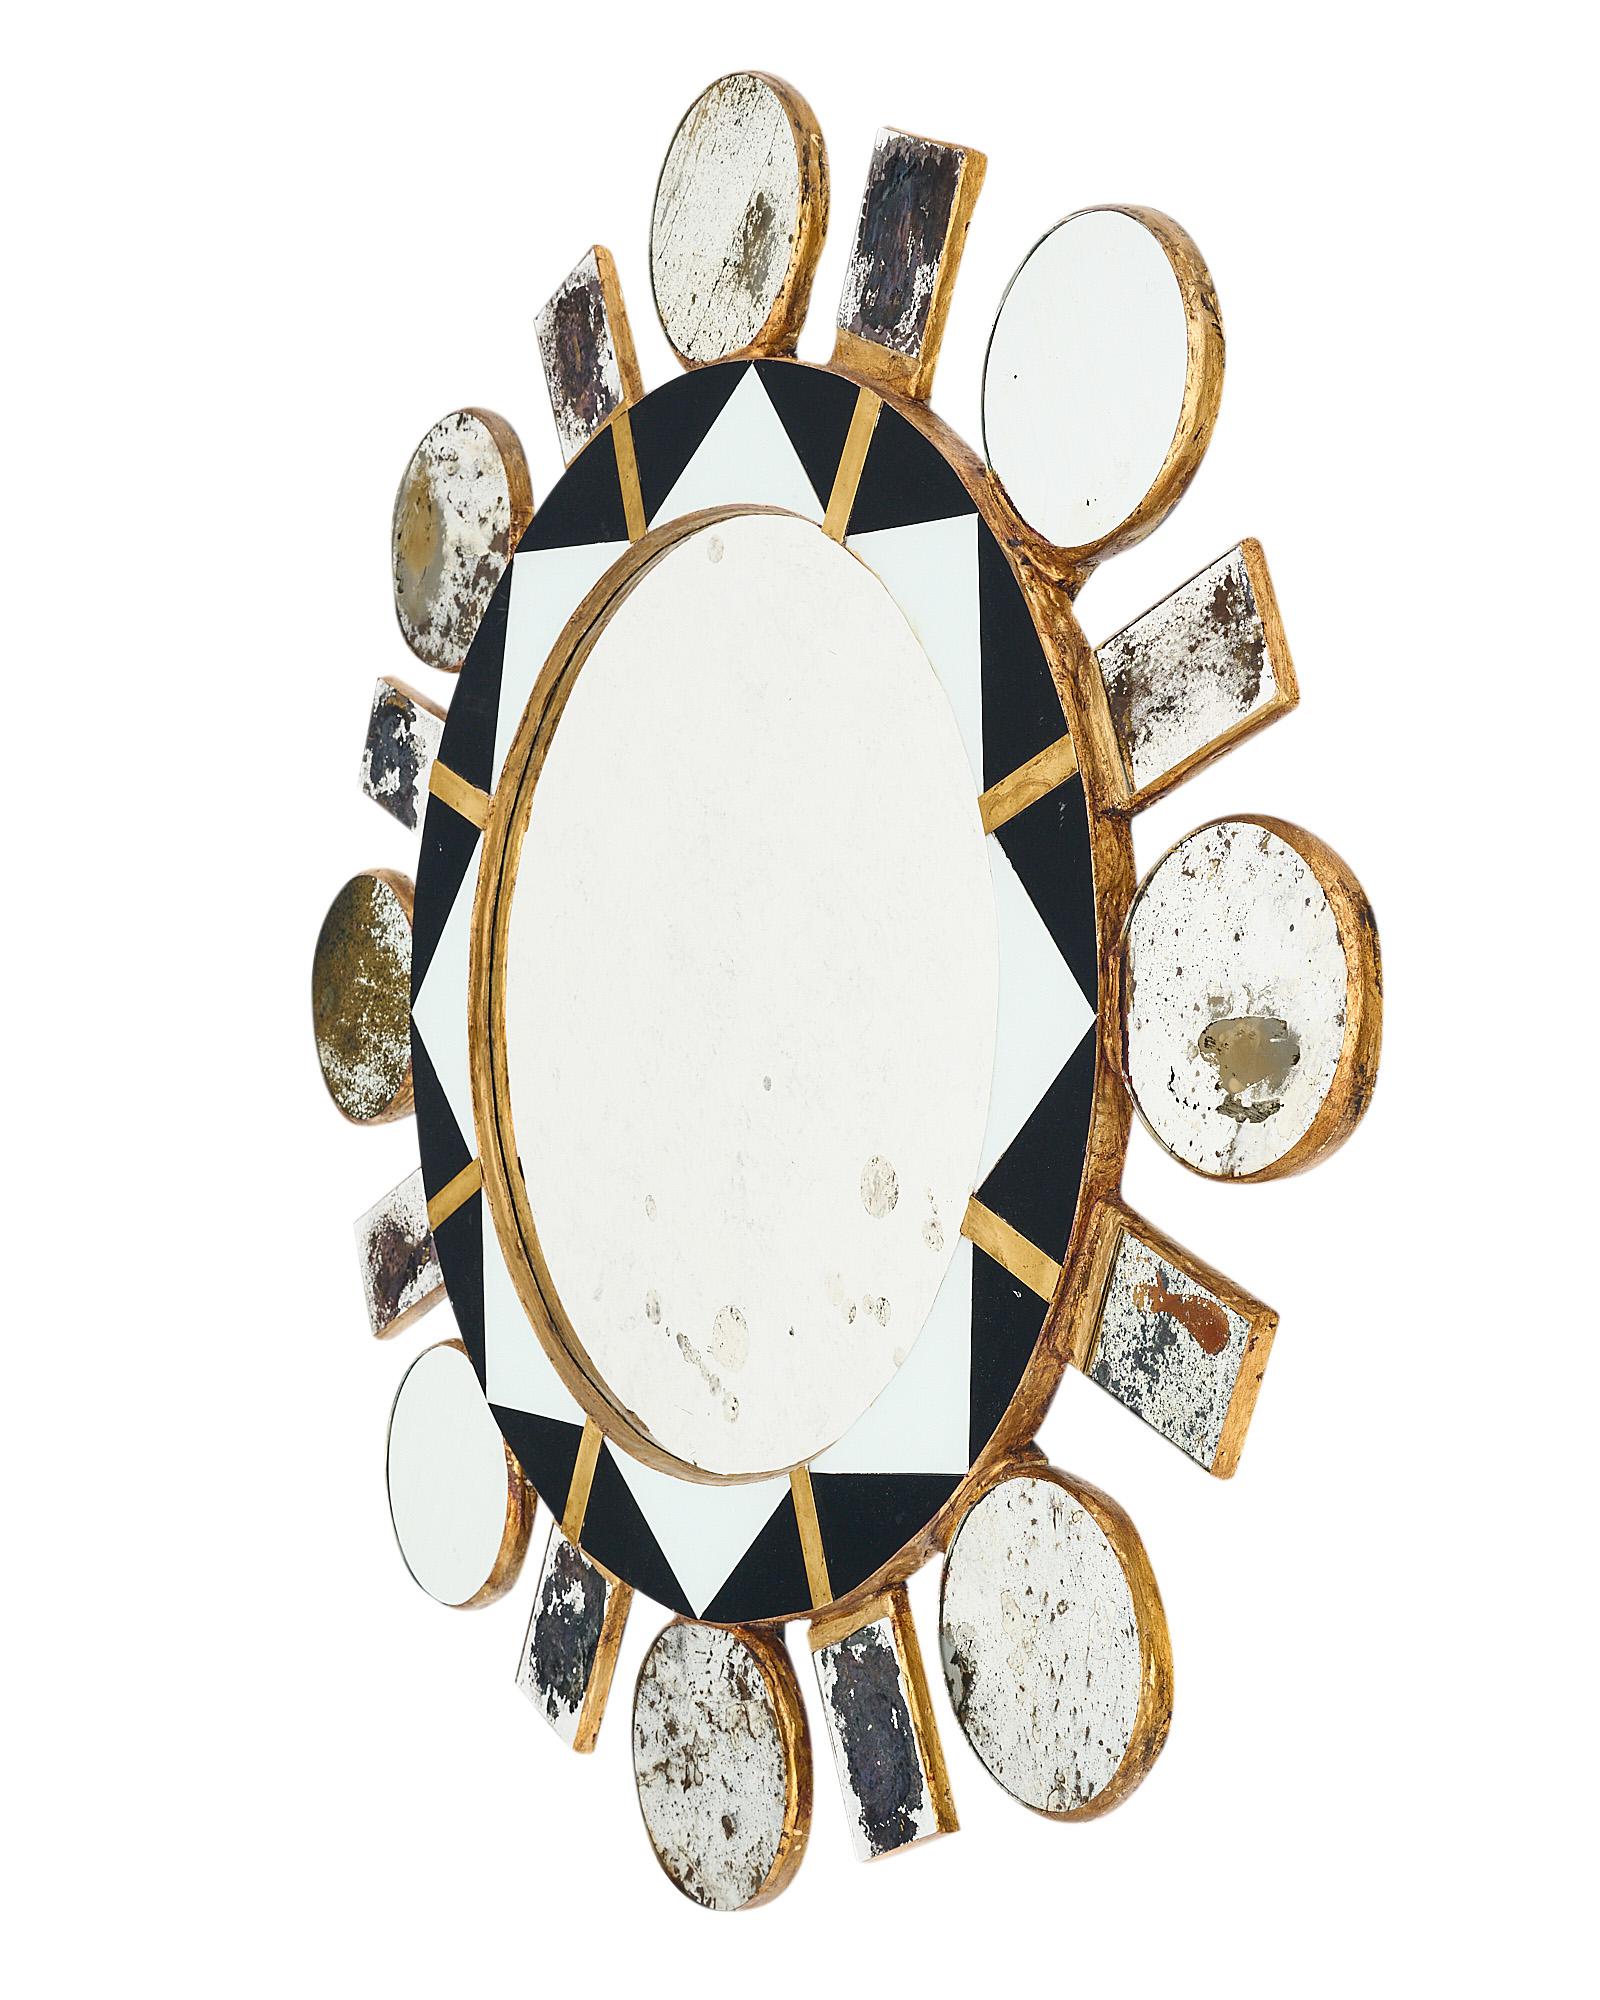 Modernist sunburst in the style of designer Line Vautrin made with a wooden structure and antiqued mirror rays. There are circular and rectangular rays emanating from a central circular mirror. The central mirror is framed with black and white glass